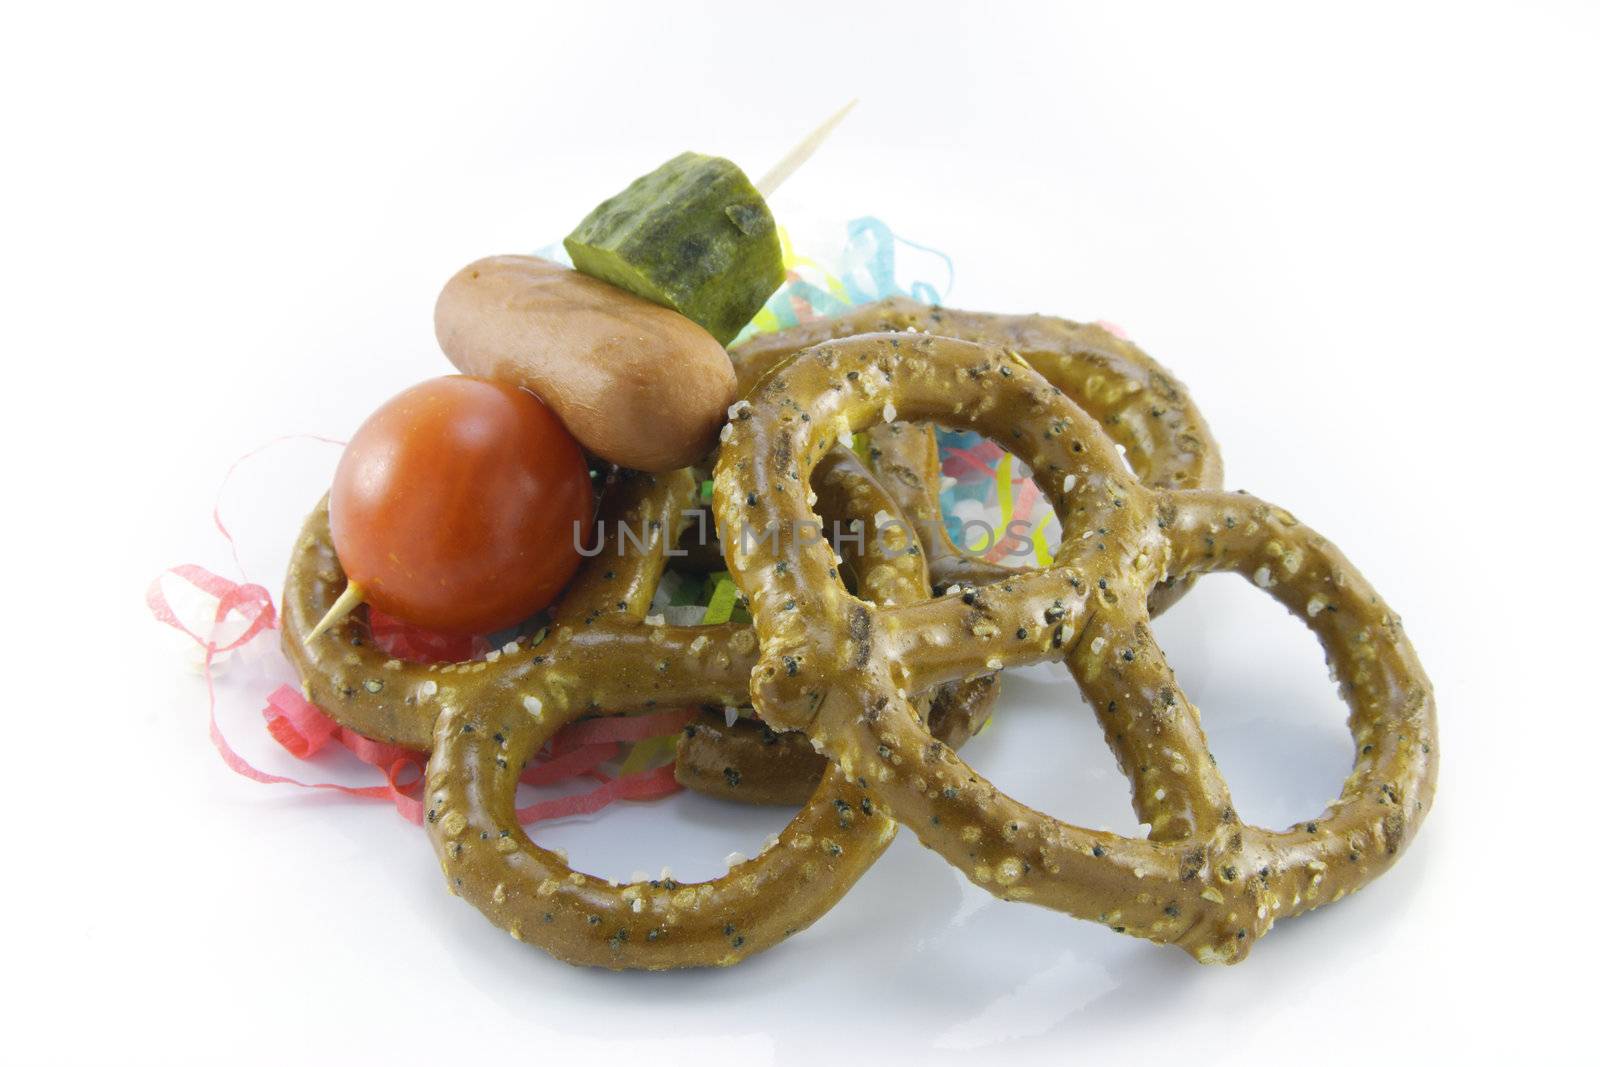 Pile of salty baked pretzels with cocktail stick containing hot dog, tomato and gherkin with streamers on a reflective white background